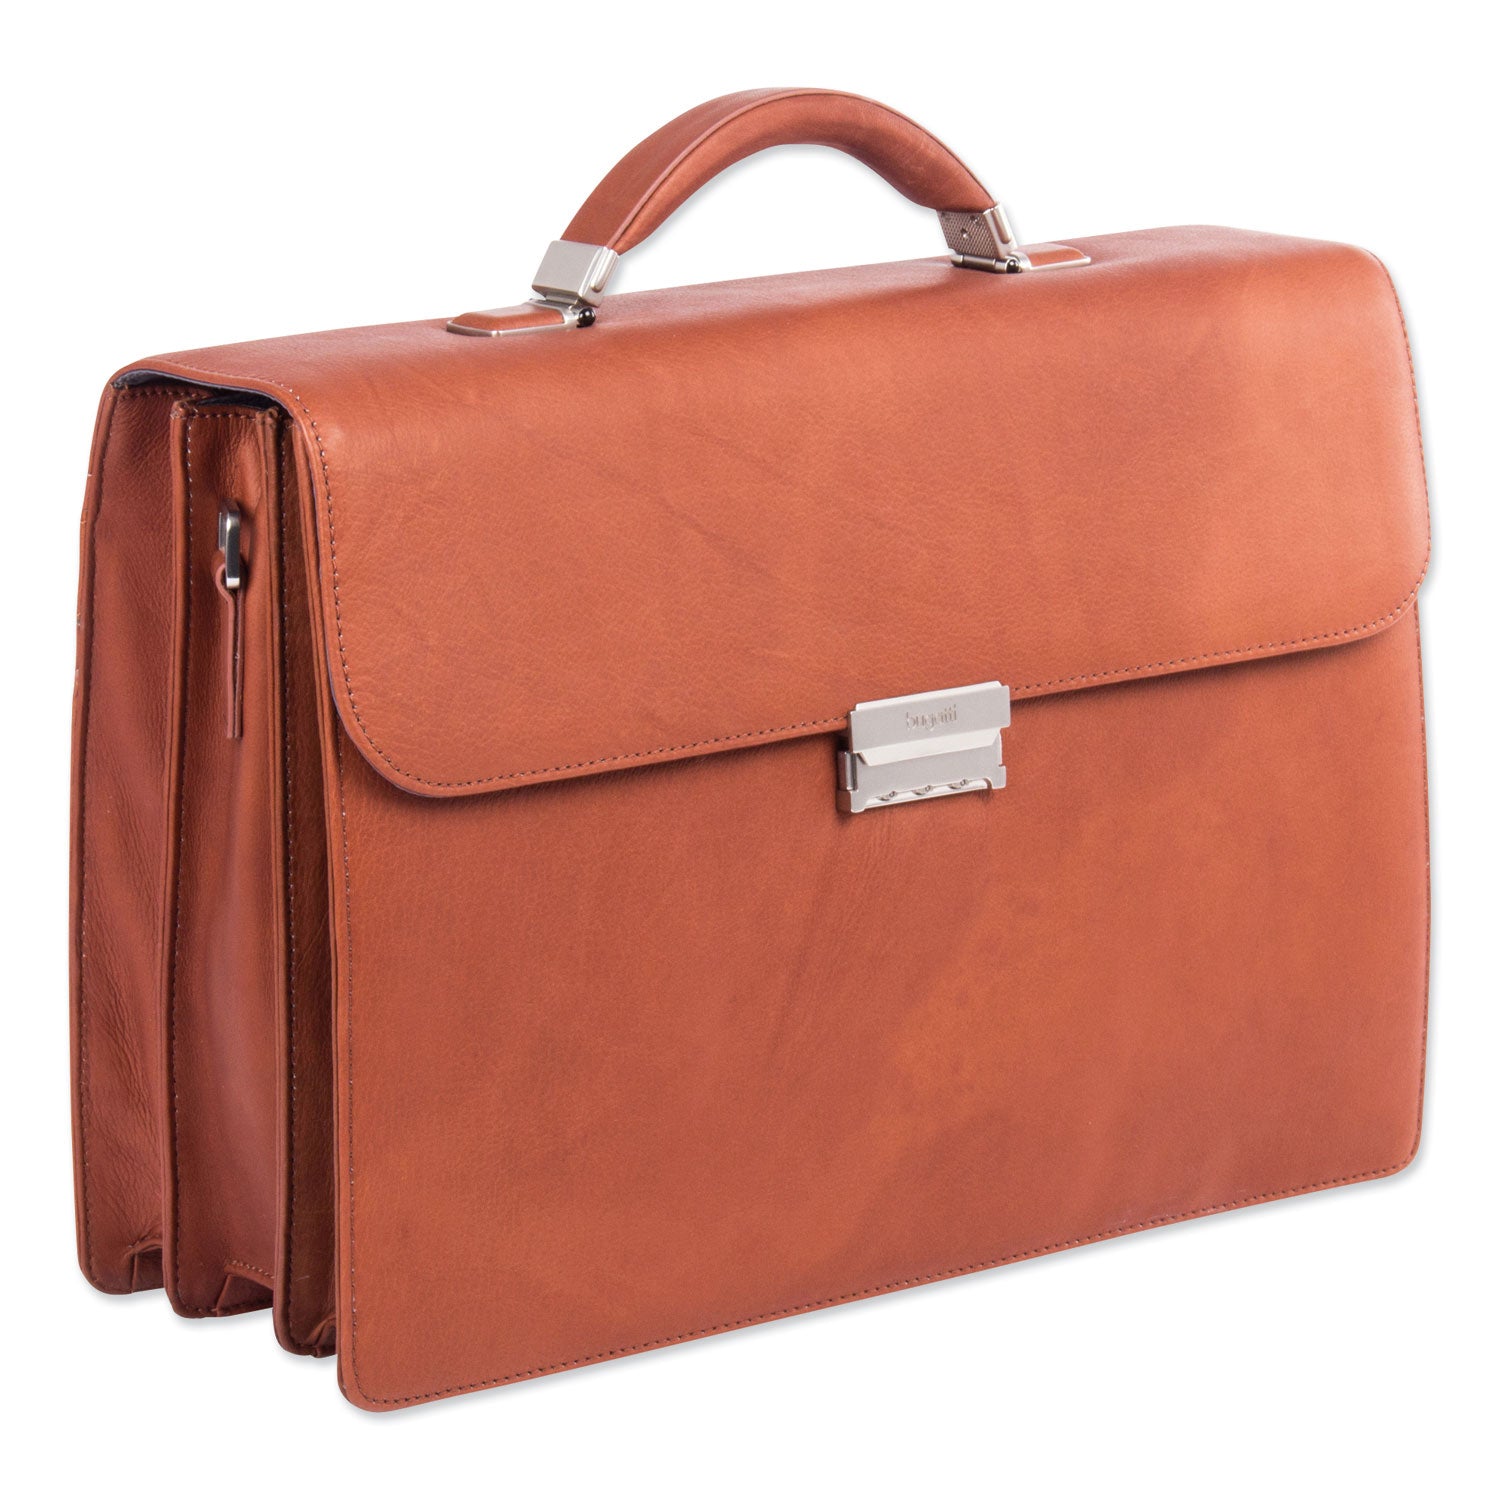 milestone-briefcase-fits-devices-up-to-156-leather-5-x-5-x-12-cognac_swz49545807sm - 1